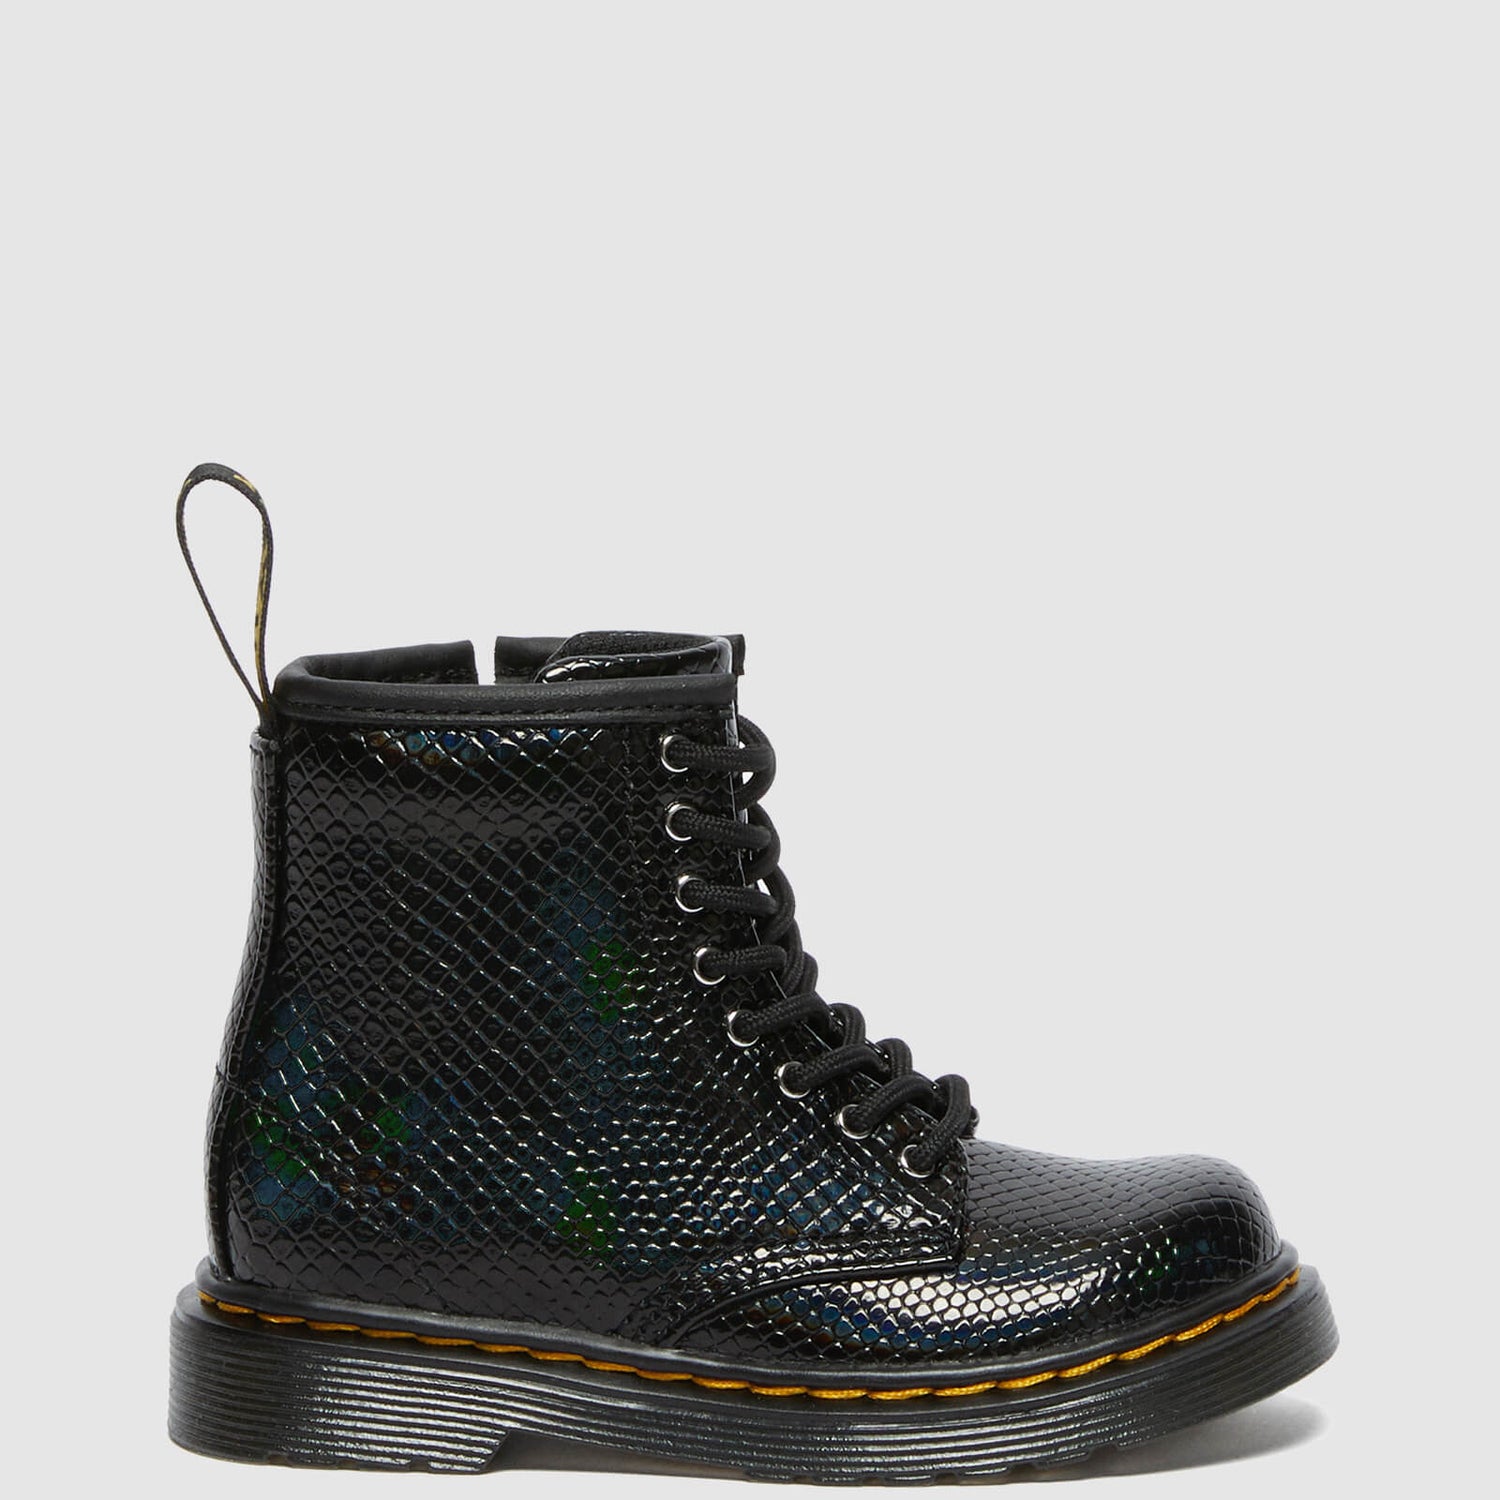 Dr. Martens Toddlers' 1460 Patent Lamper Lace Up Boots - Black Reptile Emboss